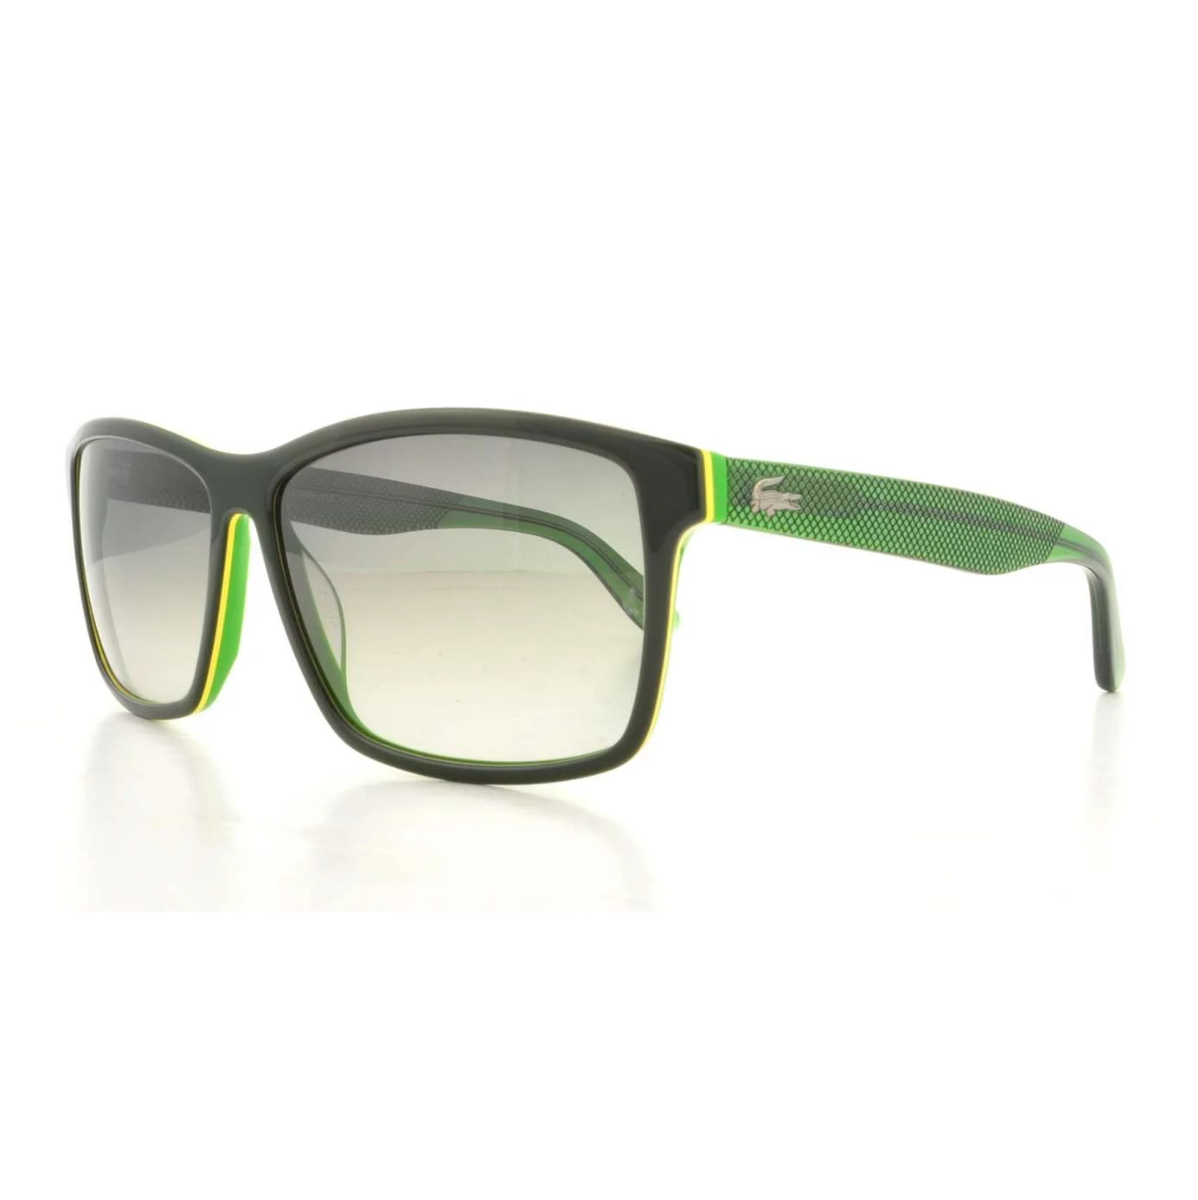 "optorium top branded sunglasses for men and women Lacoste 705 Square Sunglasses for Men and Women | Optorium - Non-polarized, light grey gradient lens, green temple. Elevate your eyewear game!"